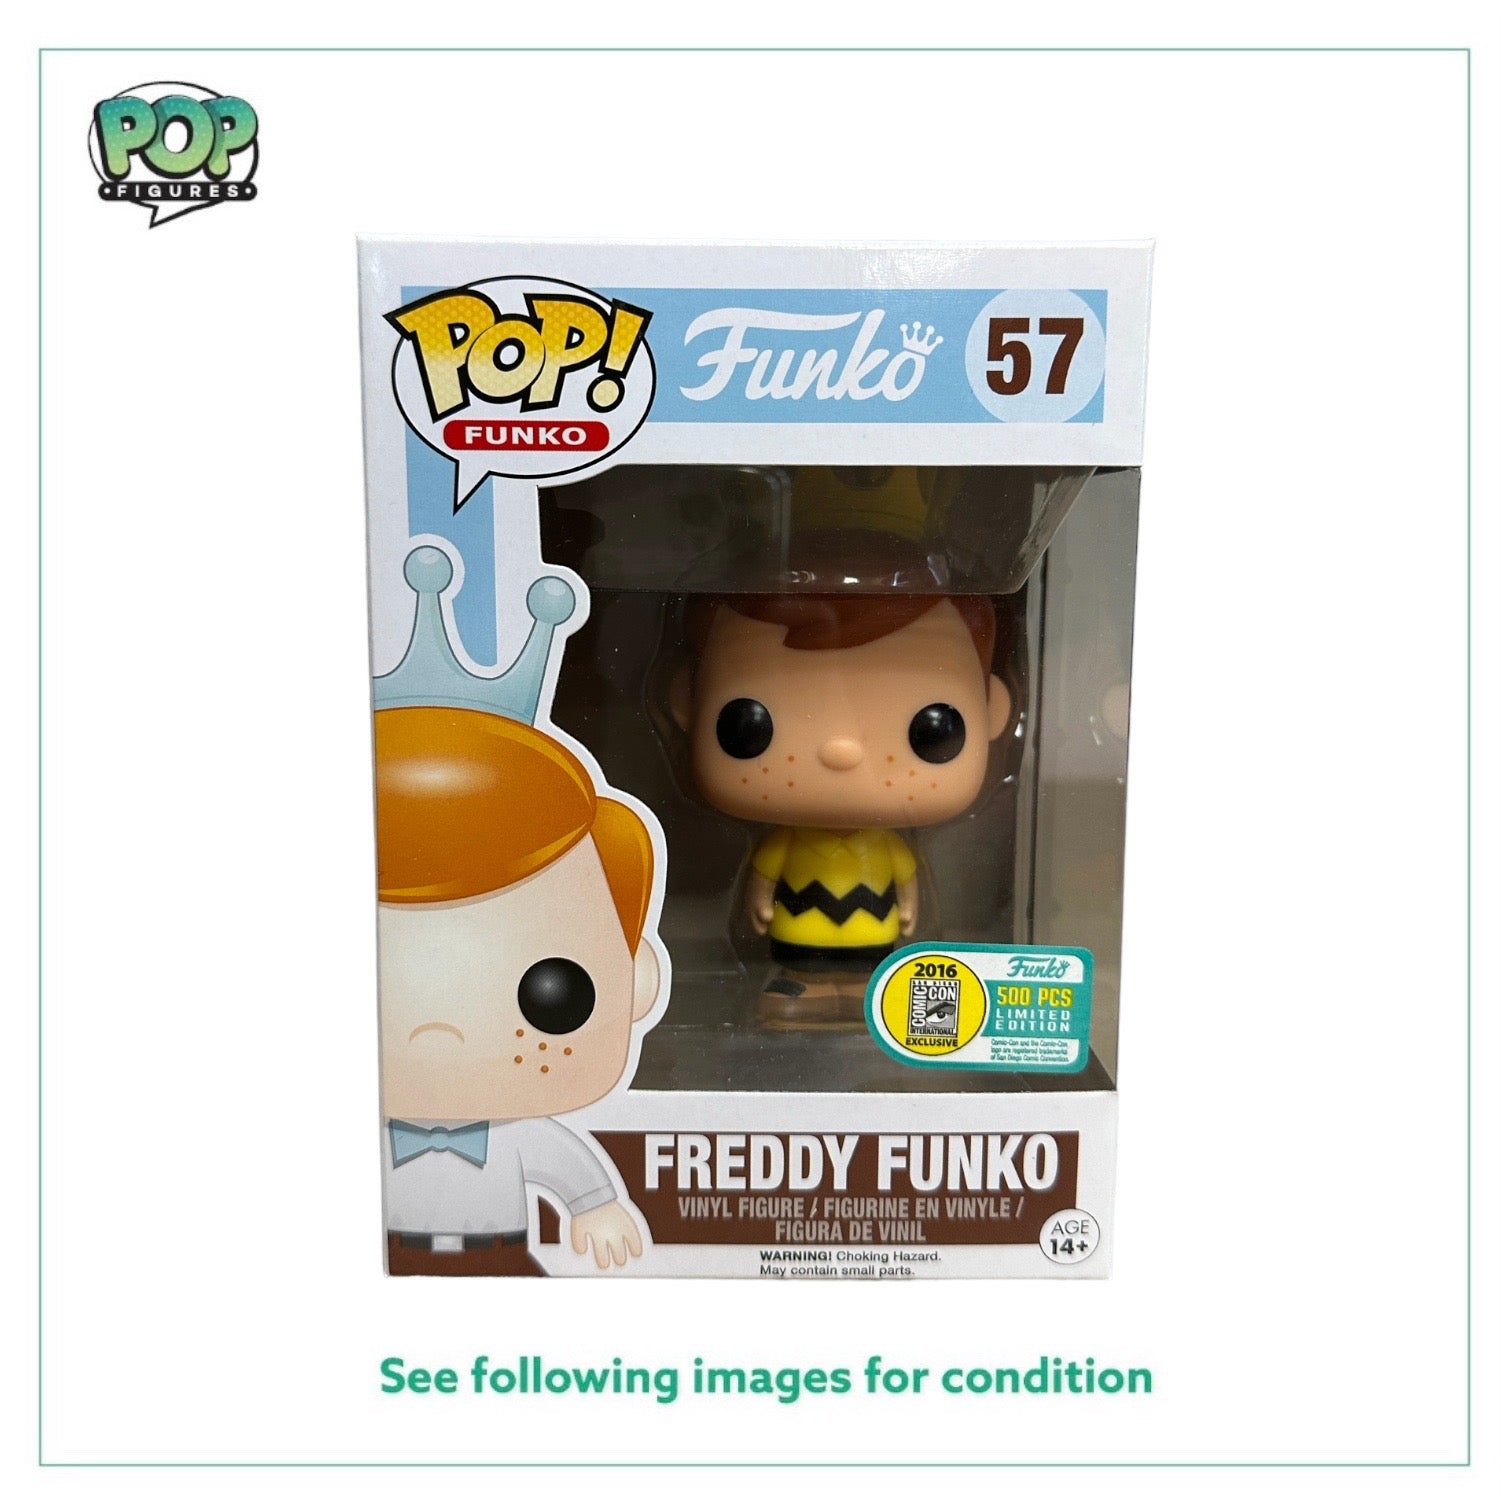 Freddy Funko as Charlie Brown #57 Funko Pop! - SDCC 2016 Exclusive LE500 Pcs - Condition 9/10